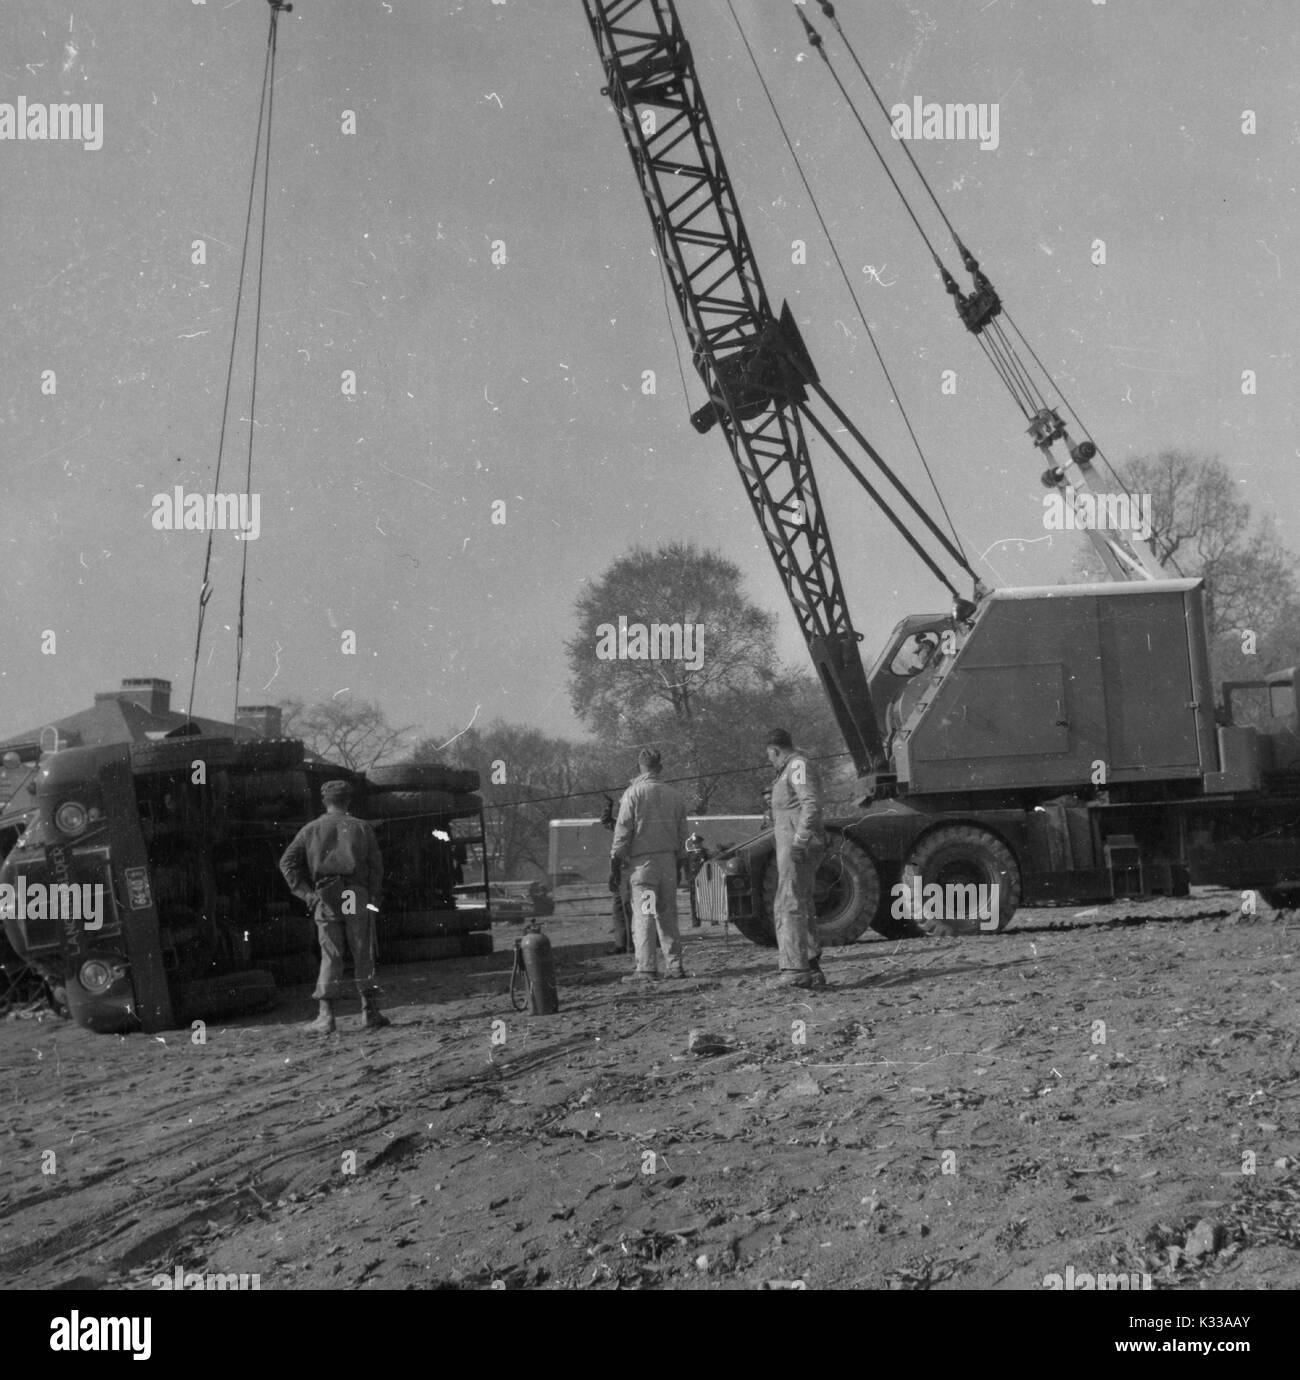 During the early stages of construction of the Milton S Eisenhower Library at Johns Hopkins University, an overturned drunk is lifted back to its upright position by a large crane, while three workers in boots and uniforms stand to oversee the process, above a rocky and muddy ground, Baltimore, Maryland, 1963. Stock Photo